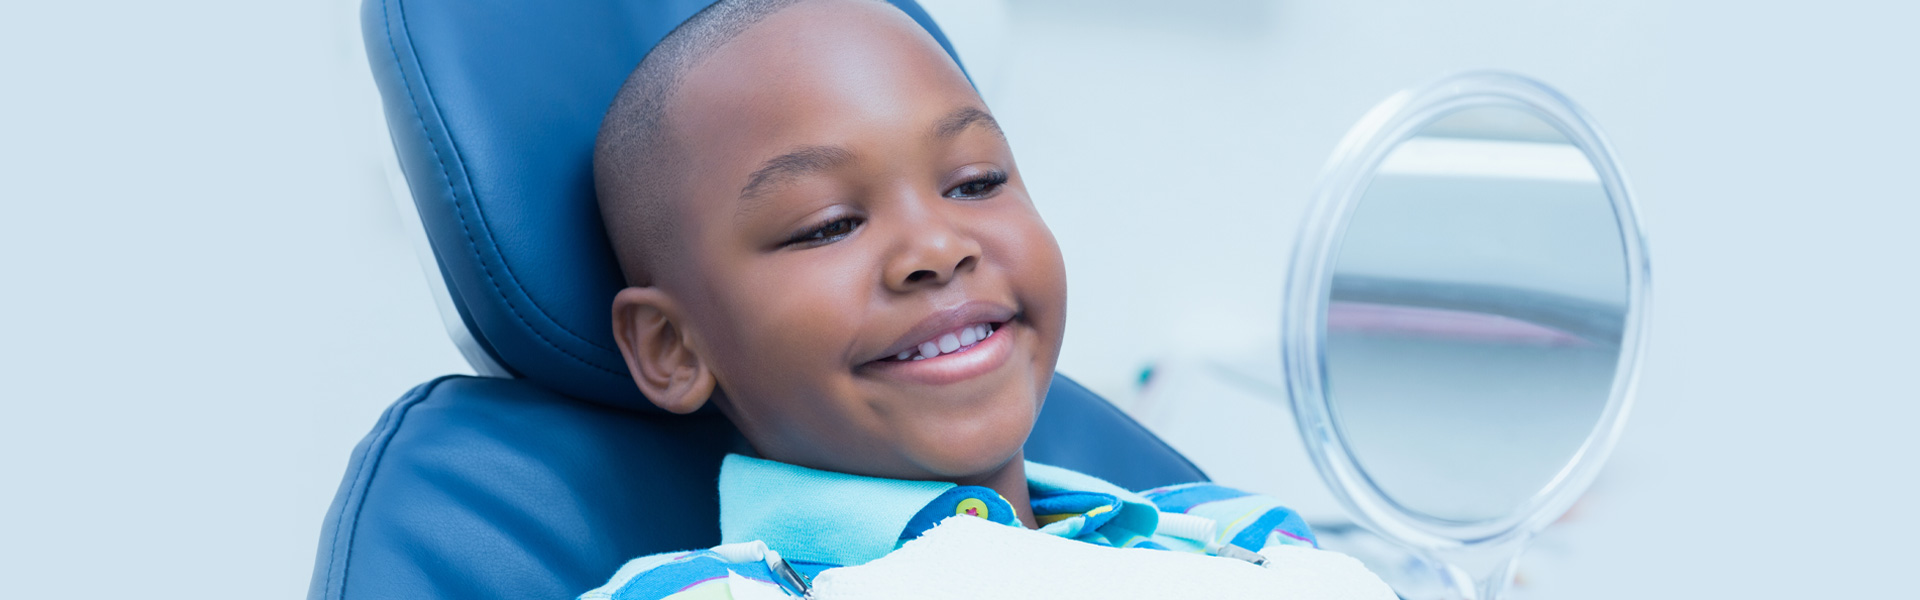 The Importance & Benefits of Pediatric Dental Care